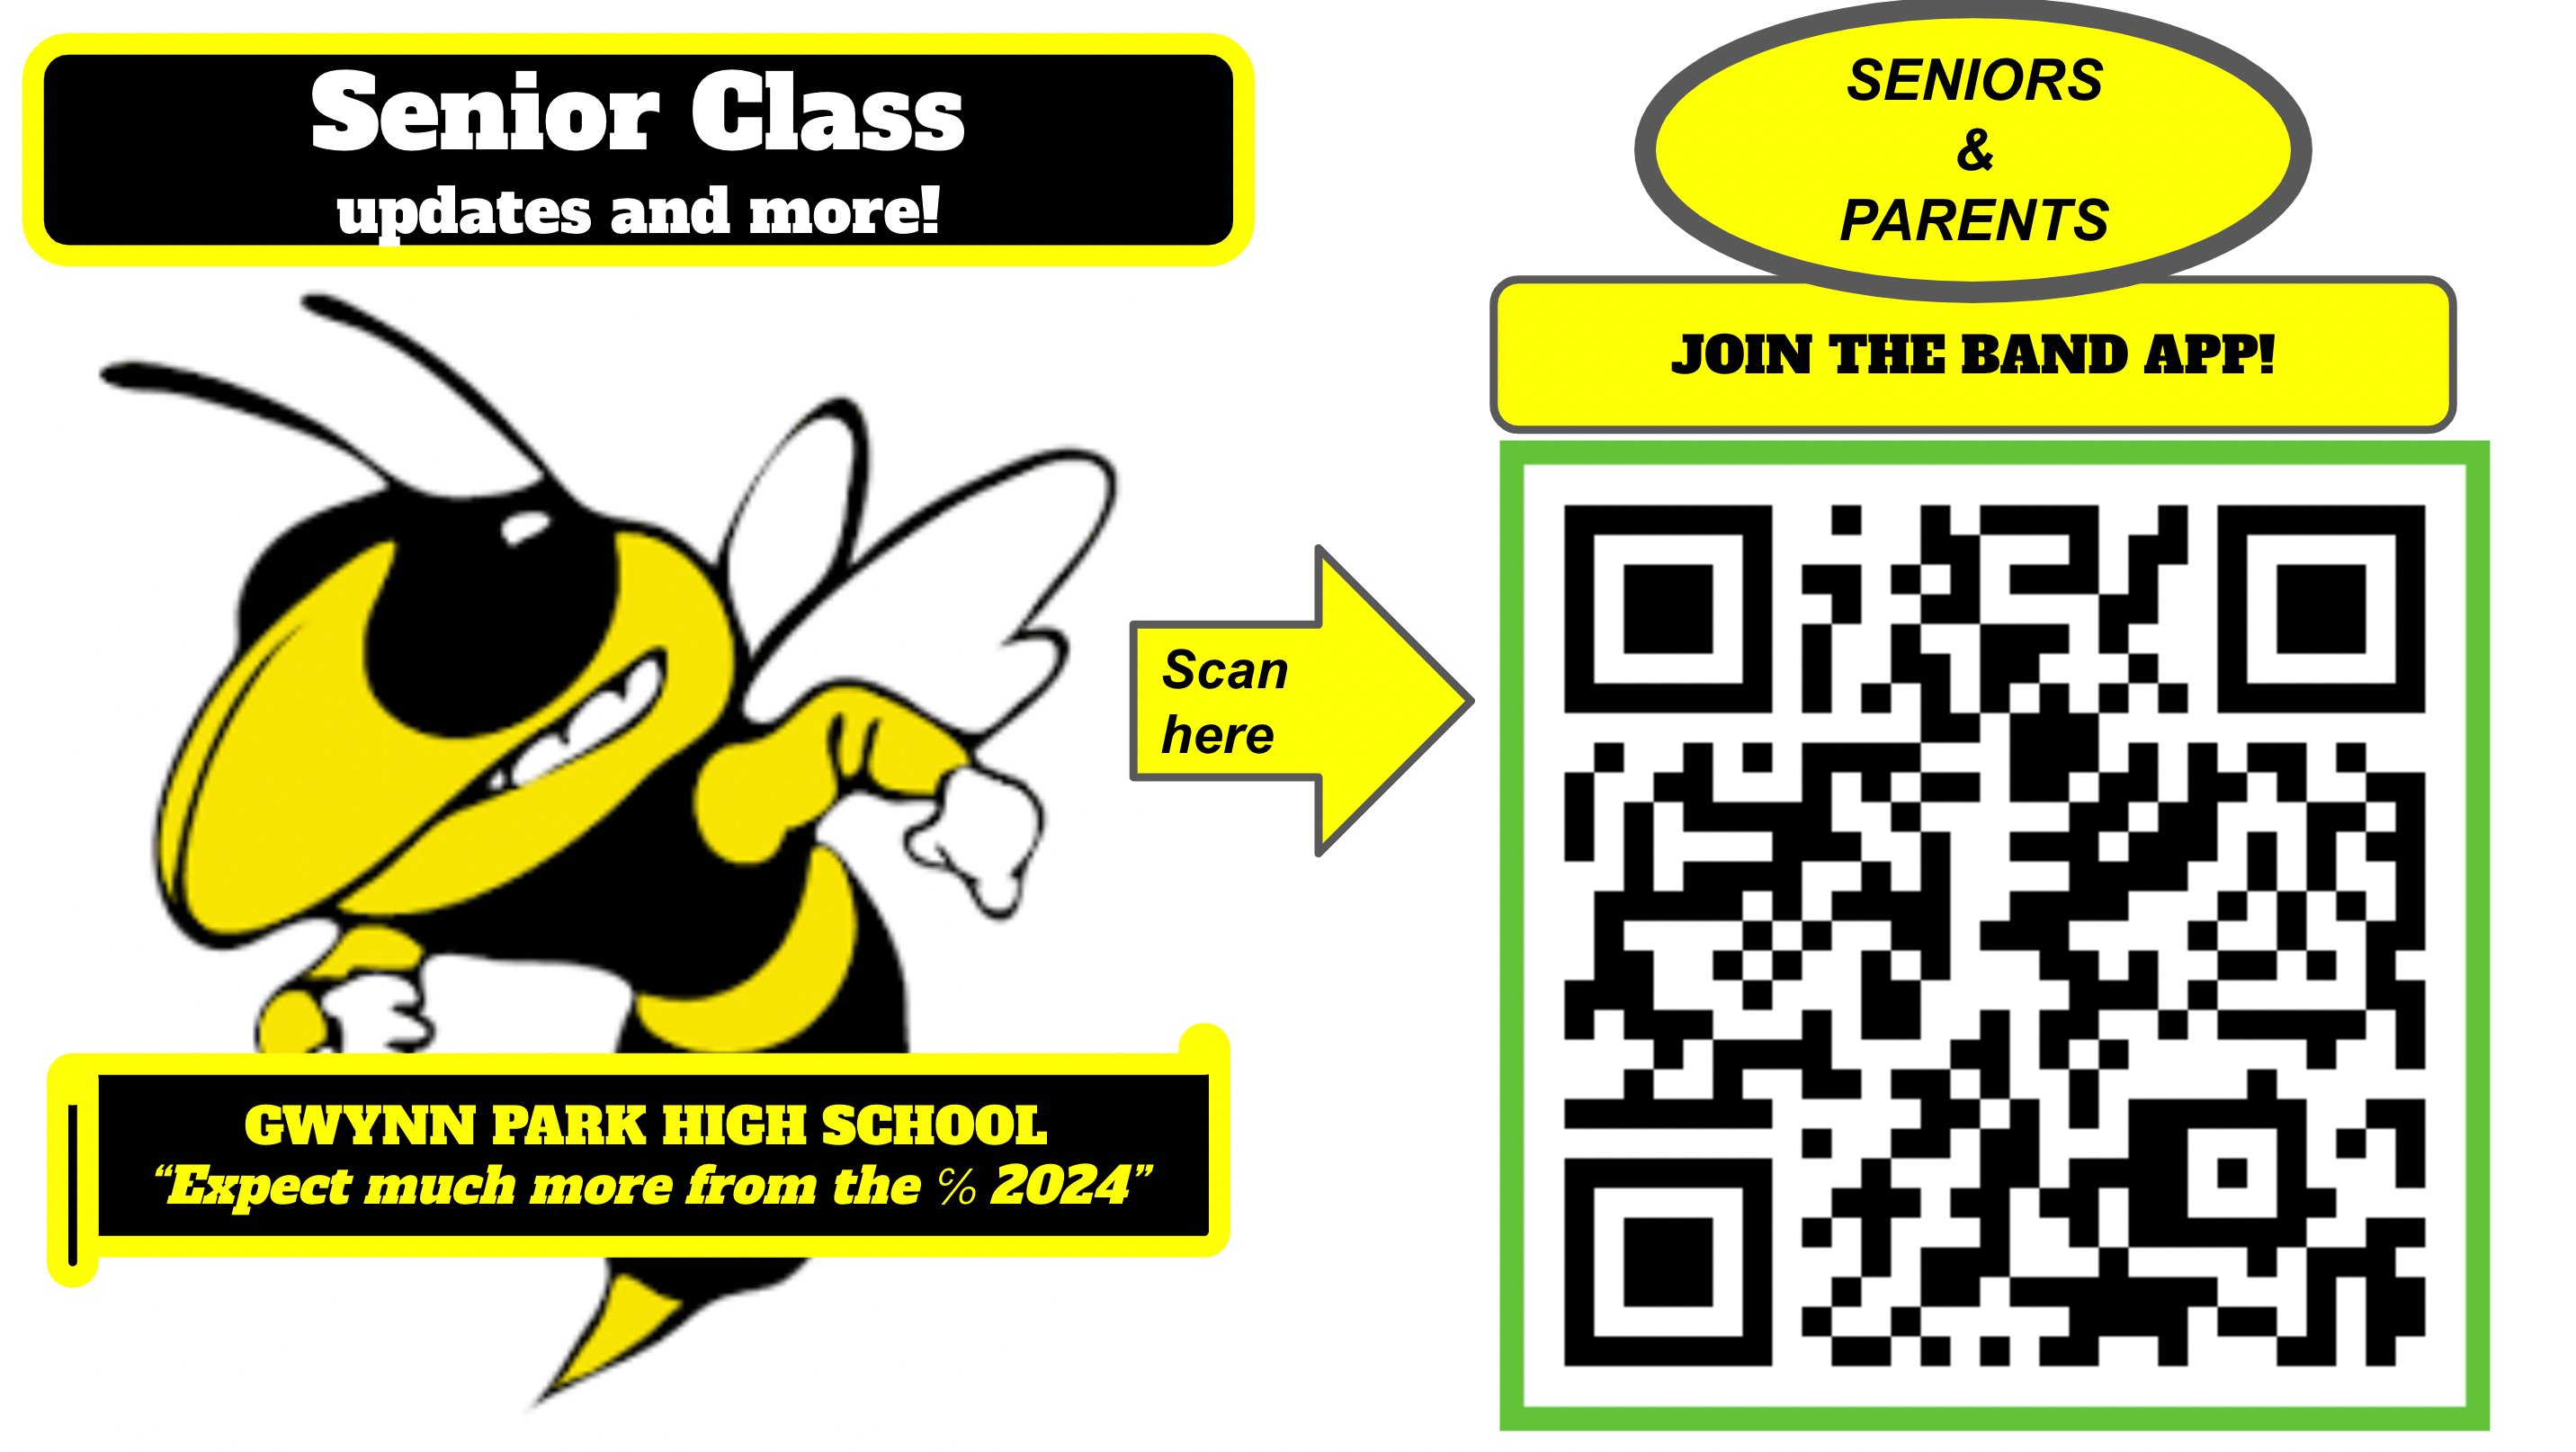 Students-and-Parents-Join-the-Band-App-flyer.jpeg